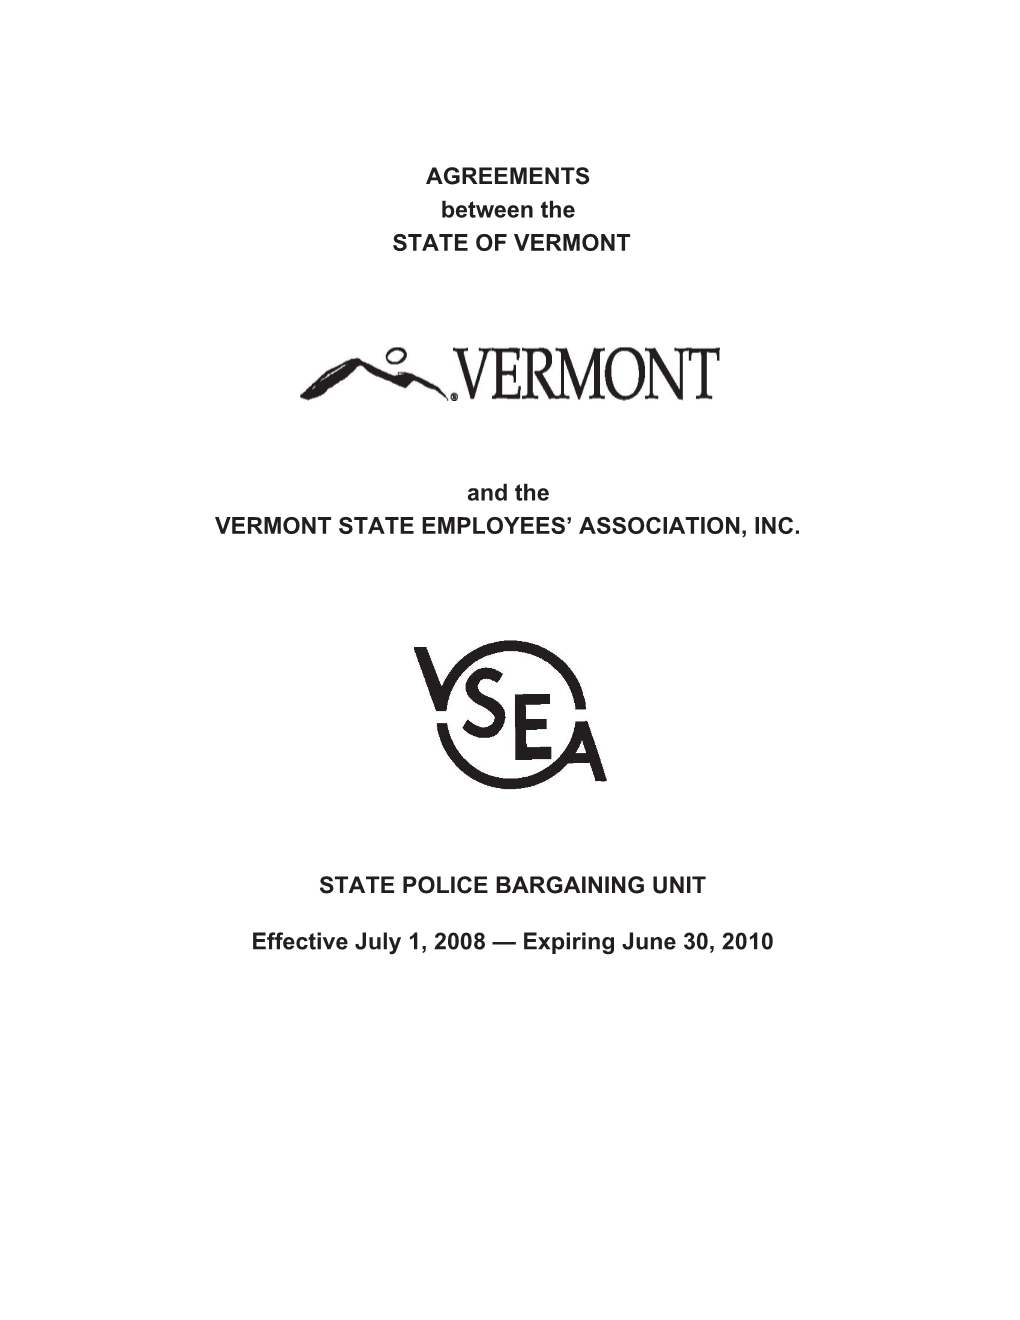 THIS AGREEMENT IS MADE by and BETWEEN the STATE of VERMONT (Hereinafter Referred to As